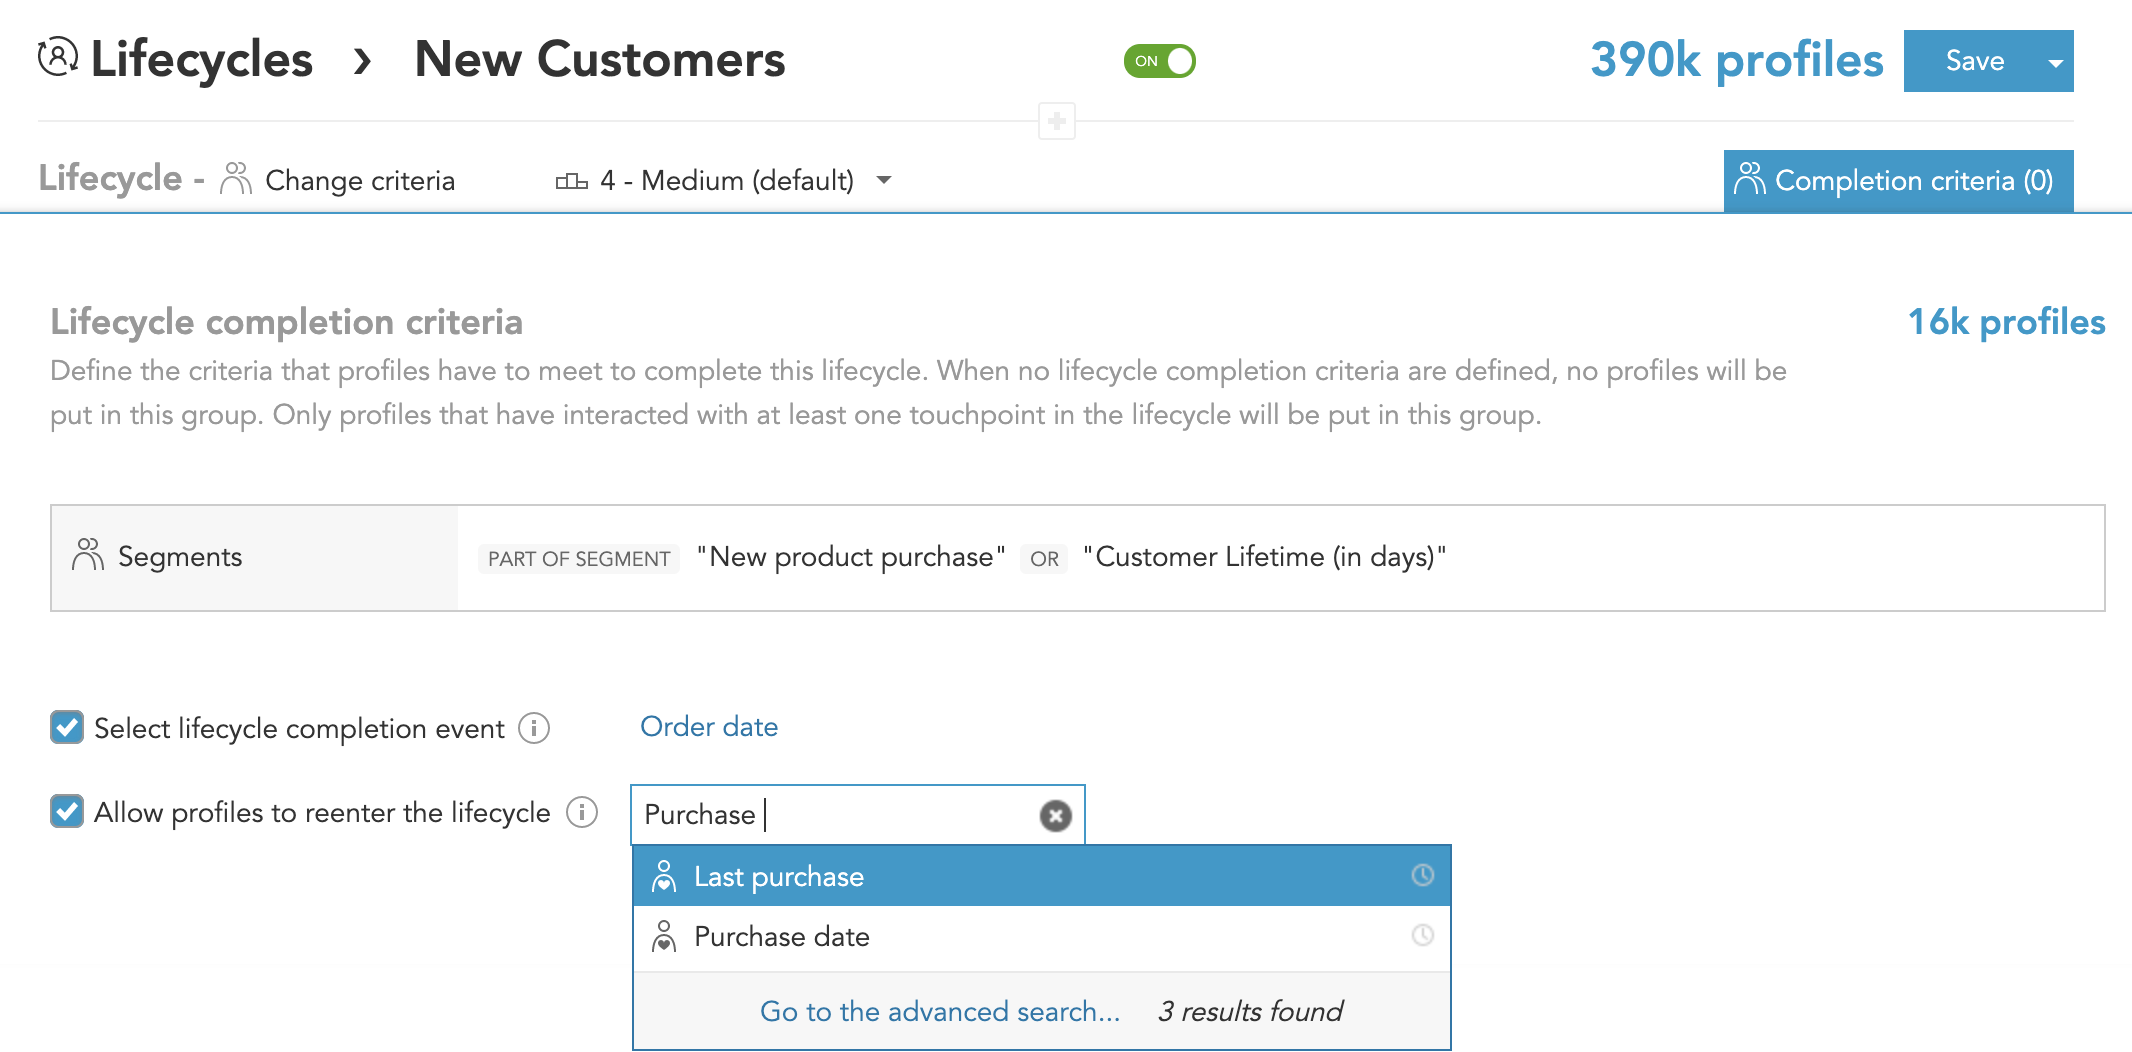 How to enable customers to repeate customer journeys through BlueConic lifecycles